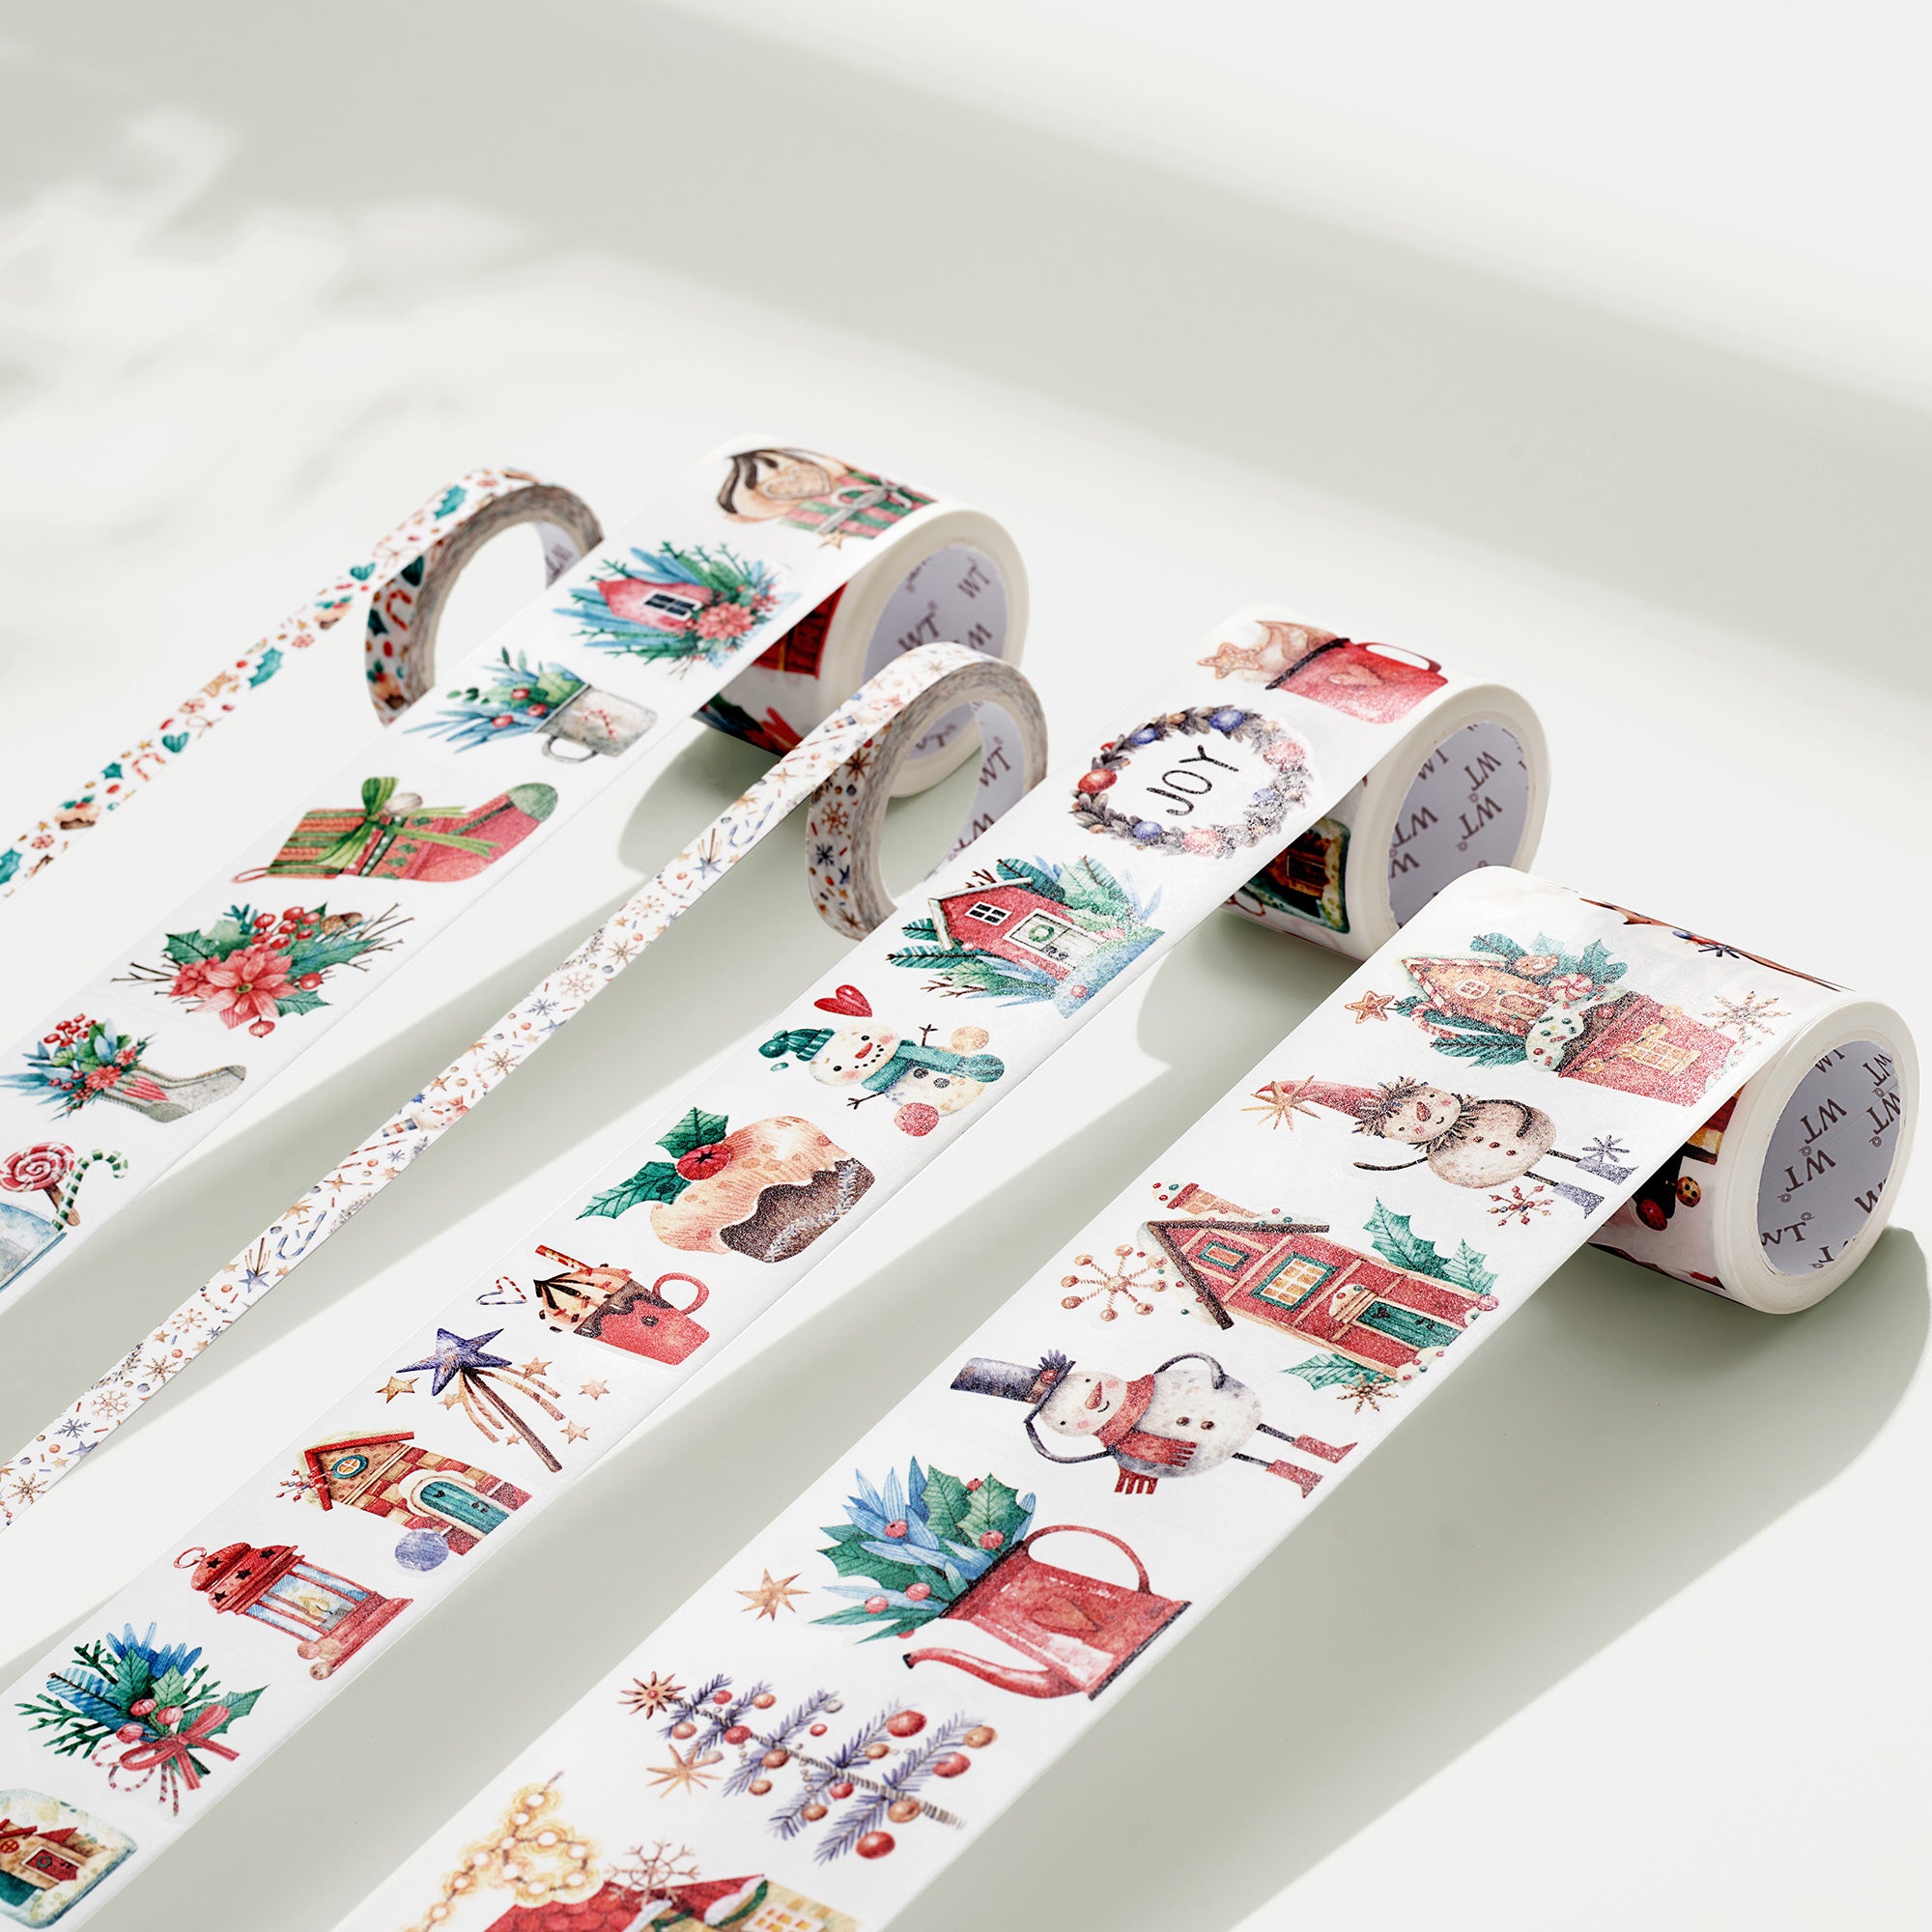 Cozy Celebrations Washi Tape Sticker Set | The Washi Tape Shop. Beautiful Washi and Decorative Tape For Bullet Journals, Gift Wrapping, Planner Decoration and DIY Projects